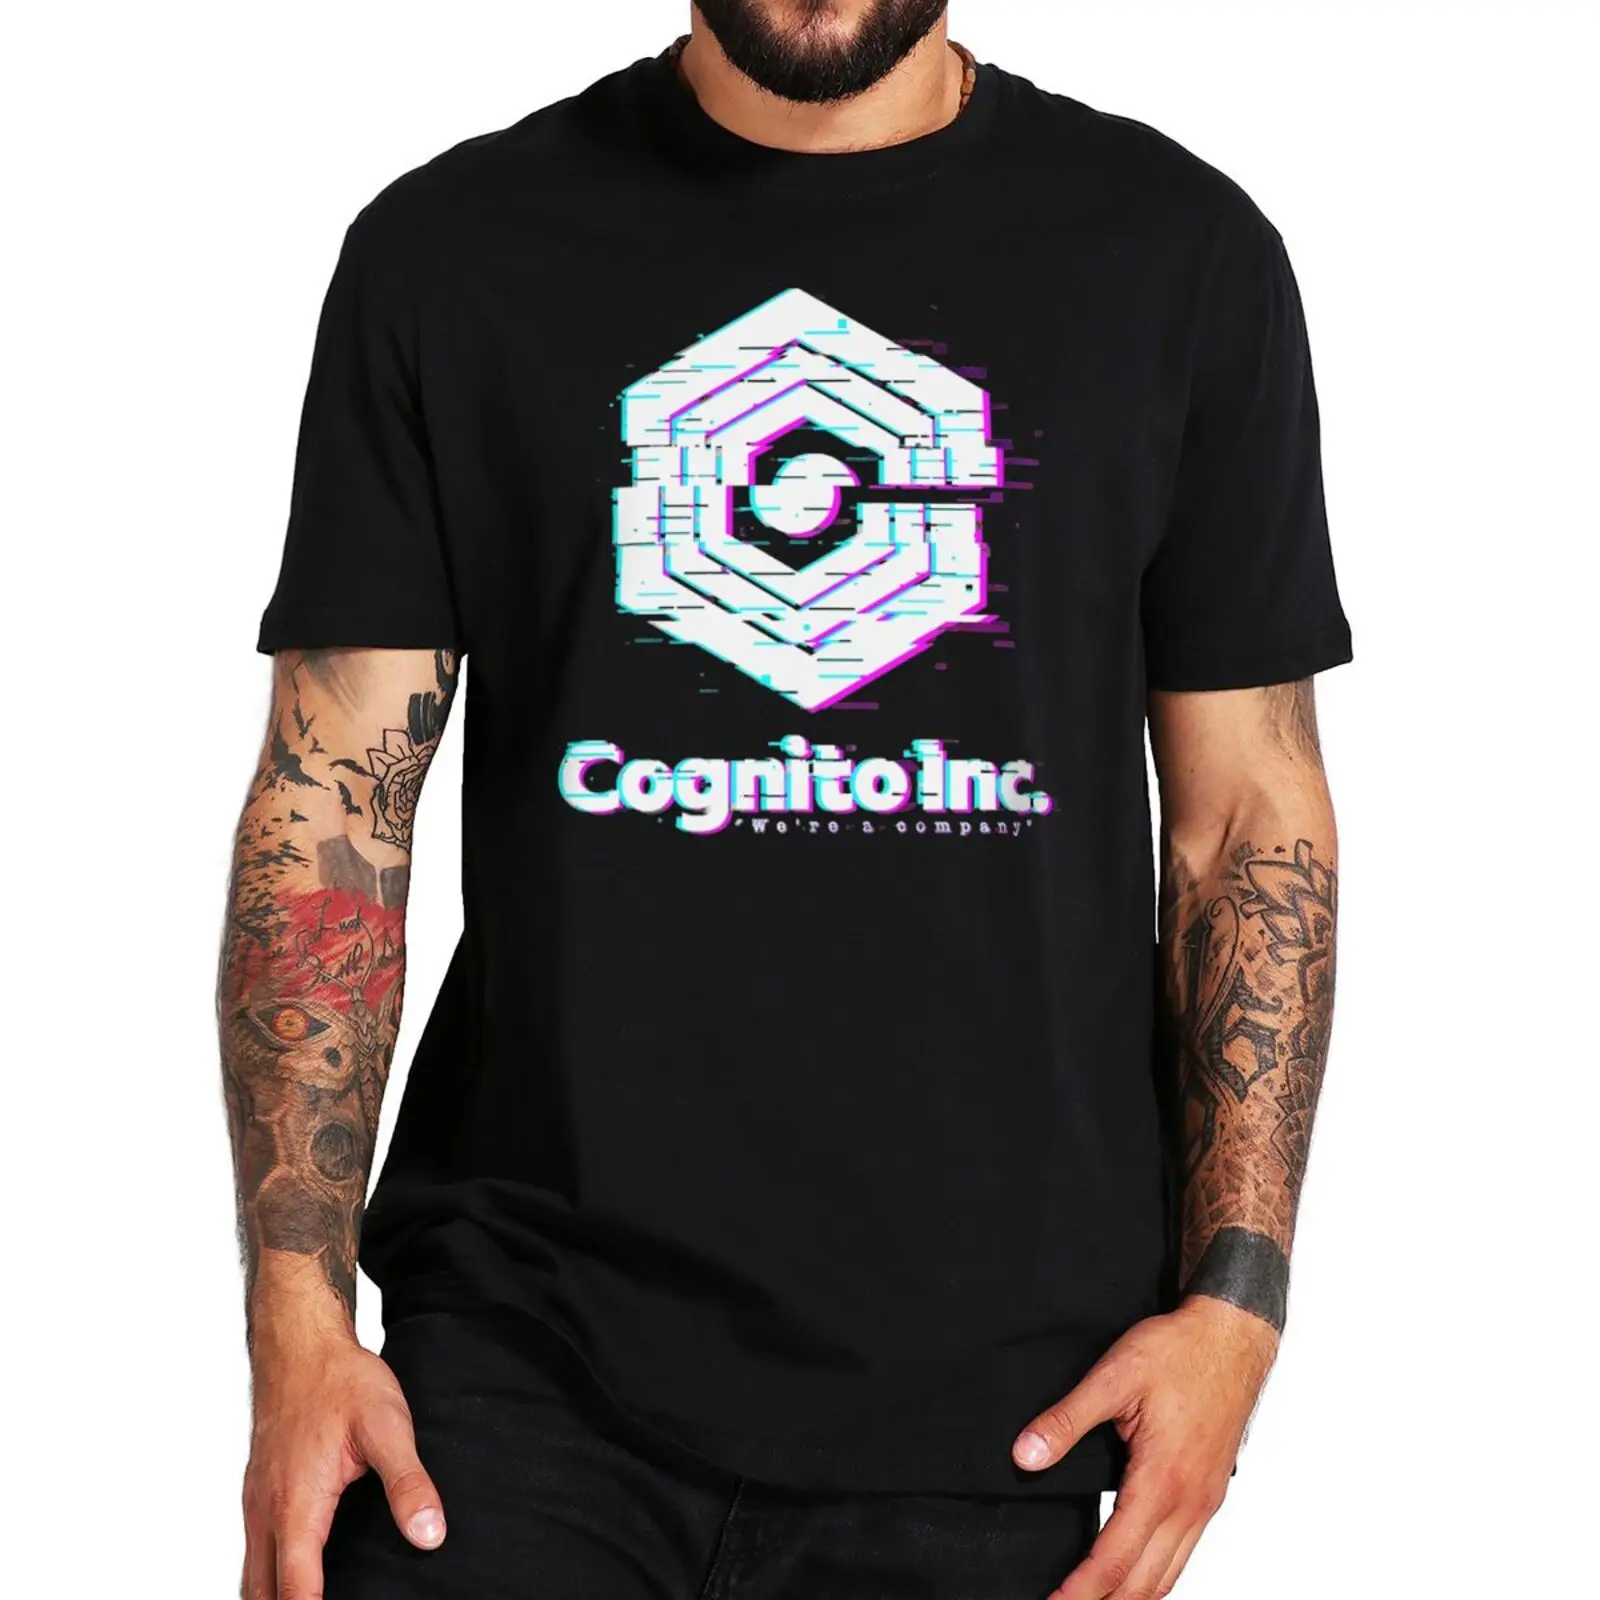 

Cognito Inc Inside Iob TV Series Classic T Shirt Vaporwave Cognito Inc We Are A Company Retro Aesthetic Tshirts 100% Cotton